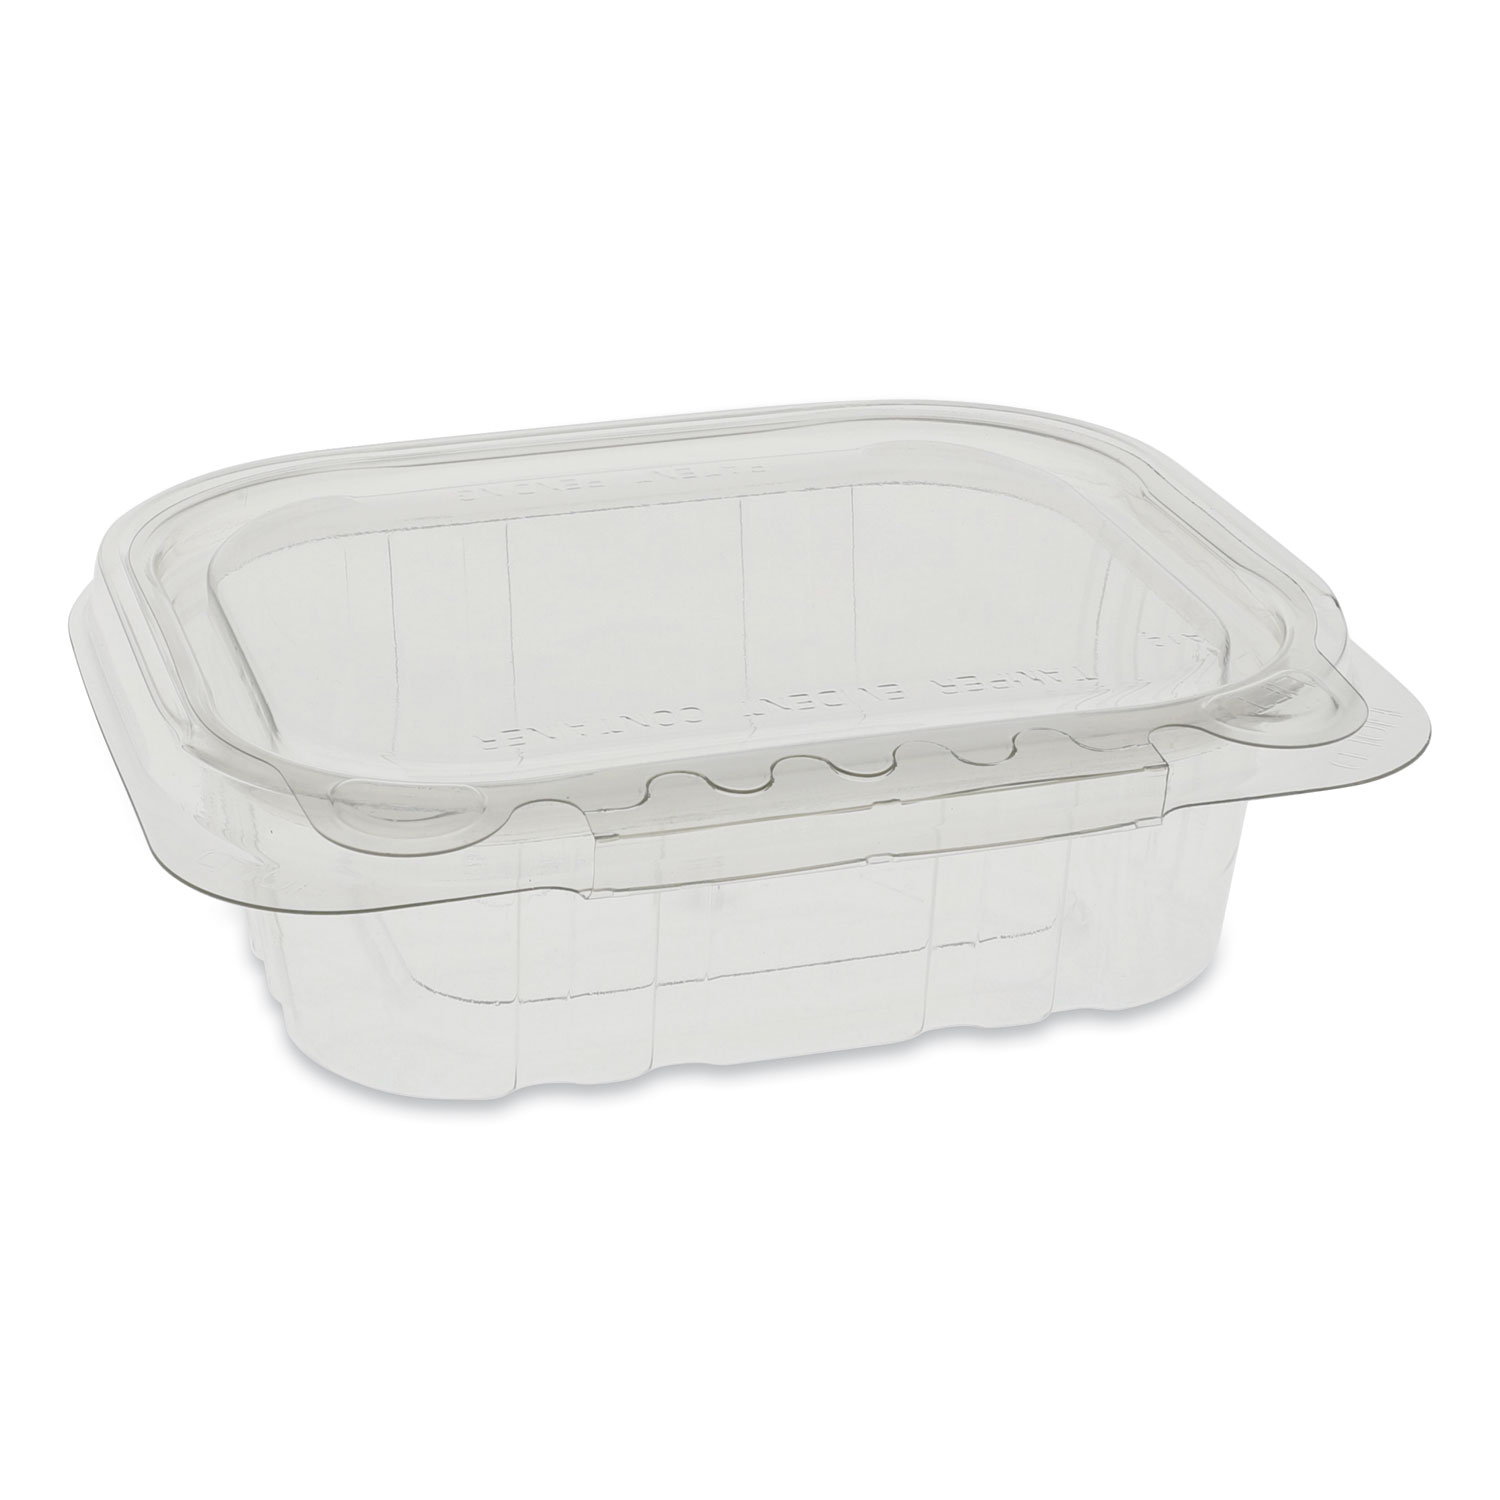 Pactiv EarthChoice Tamper Evident Deli Container, 8 oz, 5.38 x 4.5 x 1.5, Clear, 320/Carton